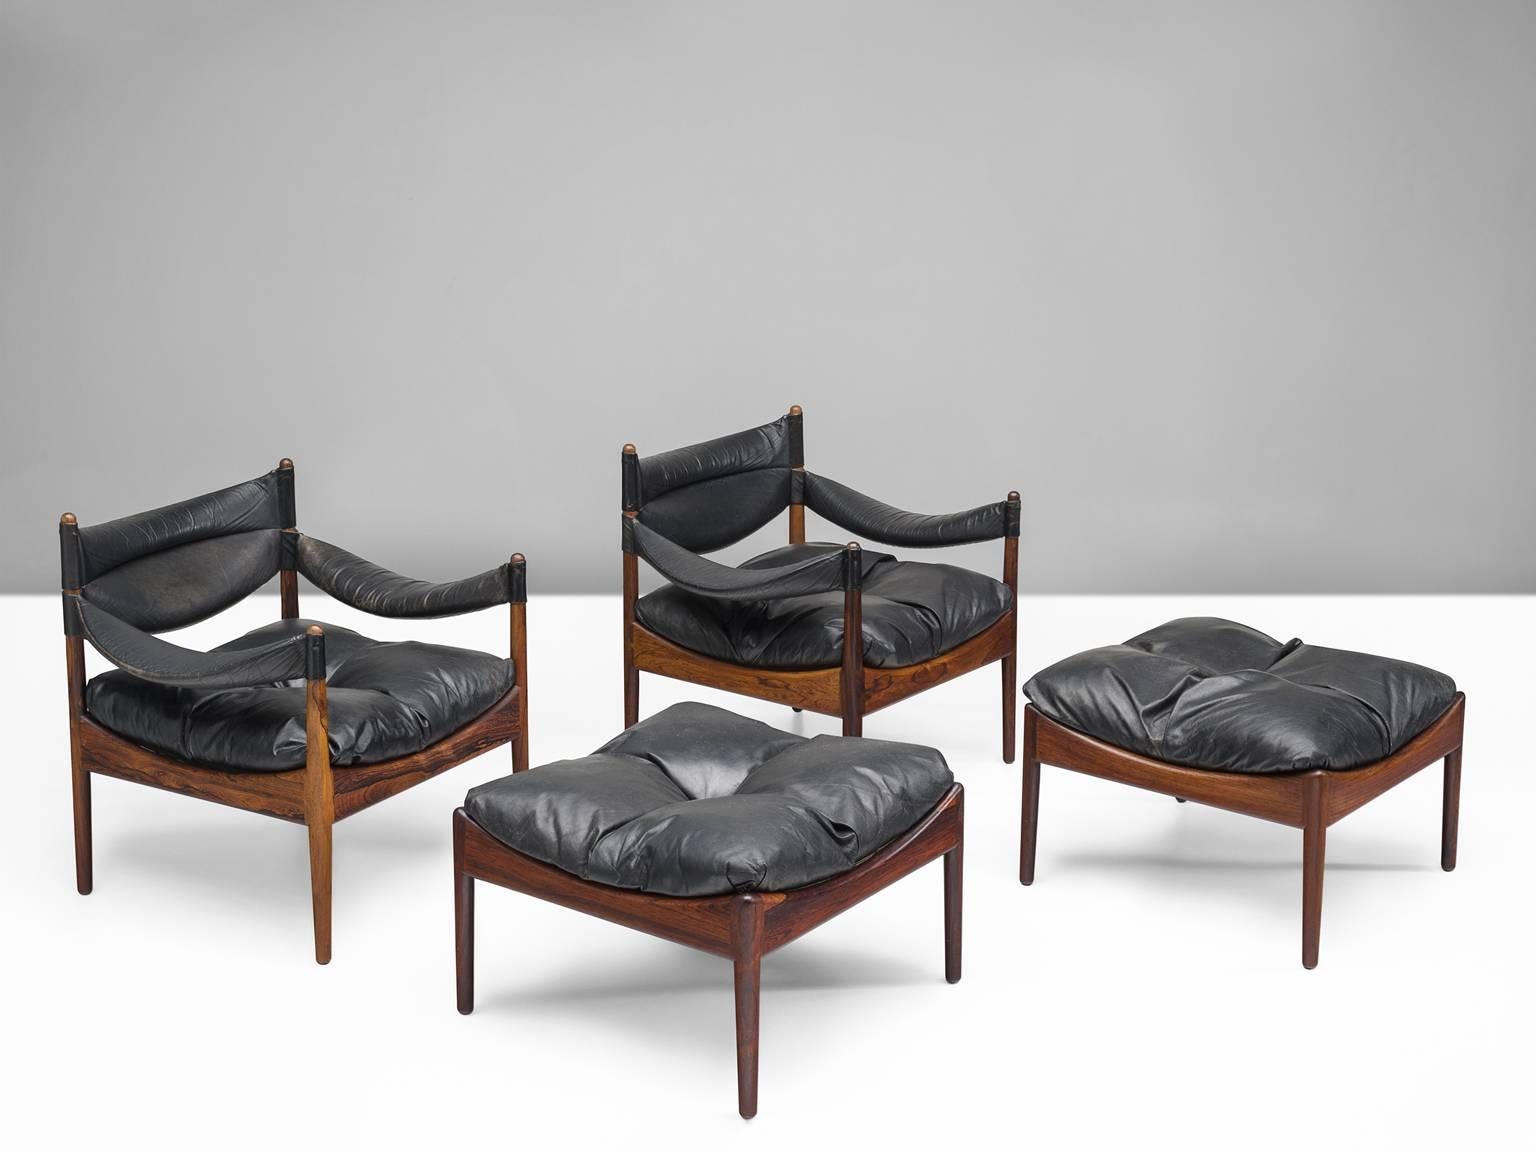 Kristian Solmer Vedel for Søren Willadsen, pair of lounge chairs 'Modus' with ottomans, rosewood and black leather. Design 'Modus', Denmark, 1960s.

This highly comfortable pair of armchairs is provided with two matching footstools. The original